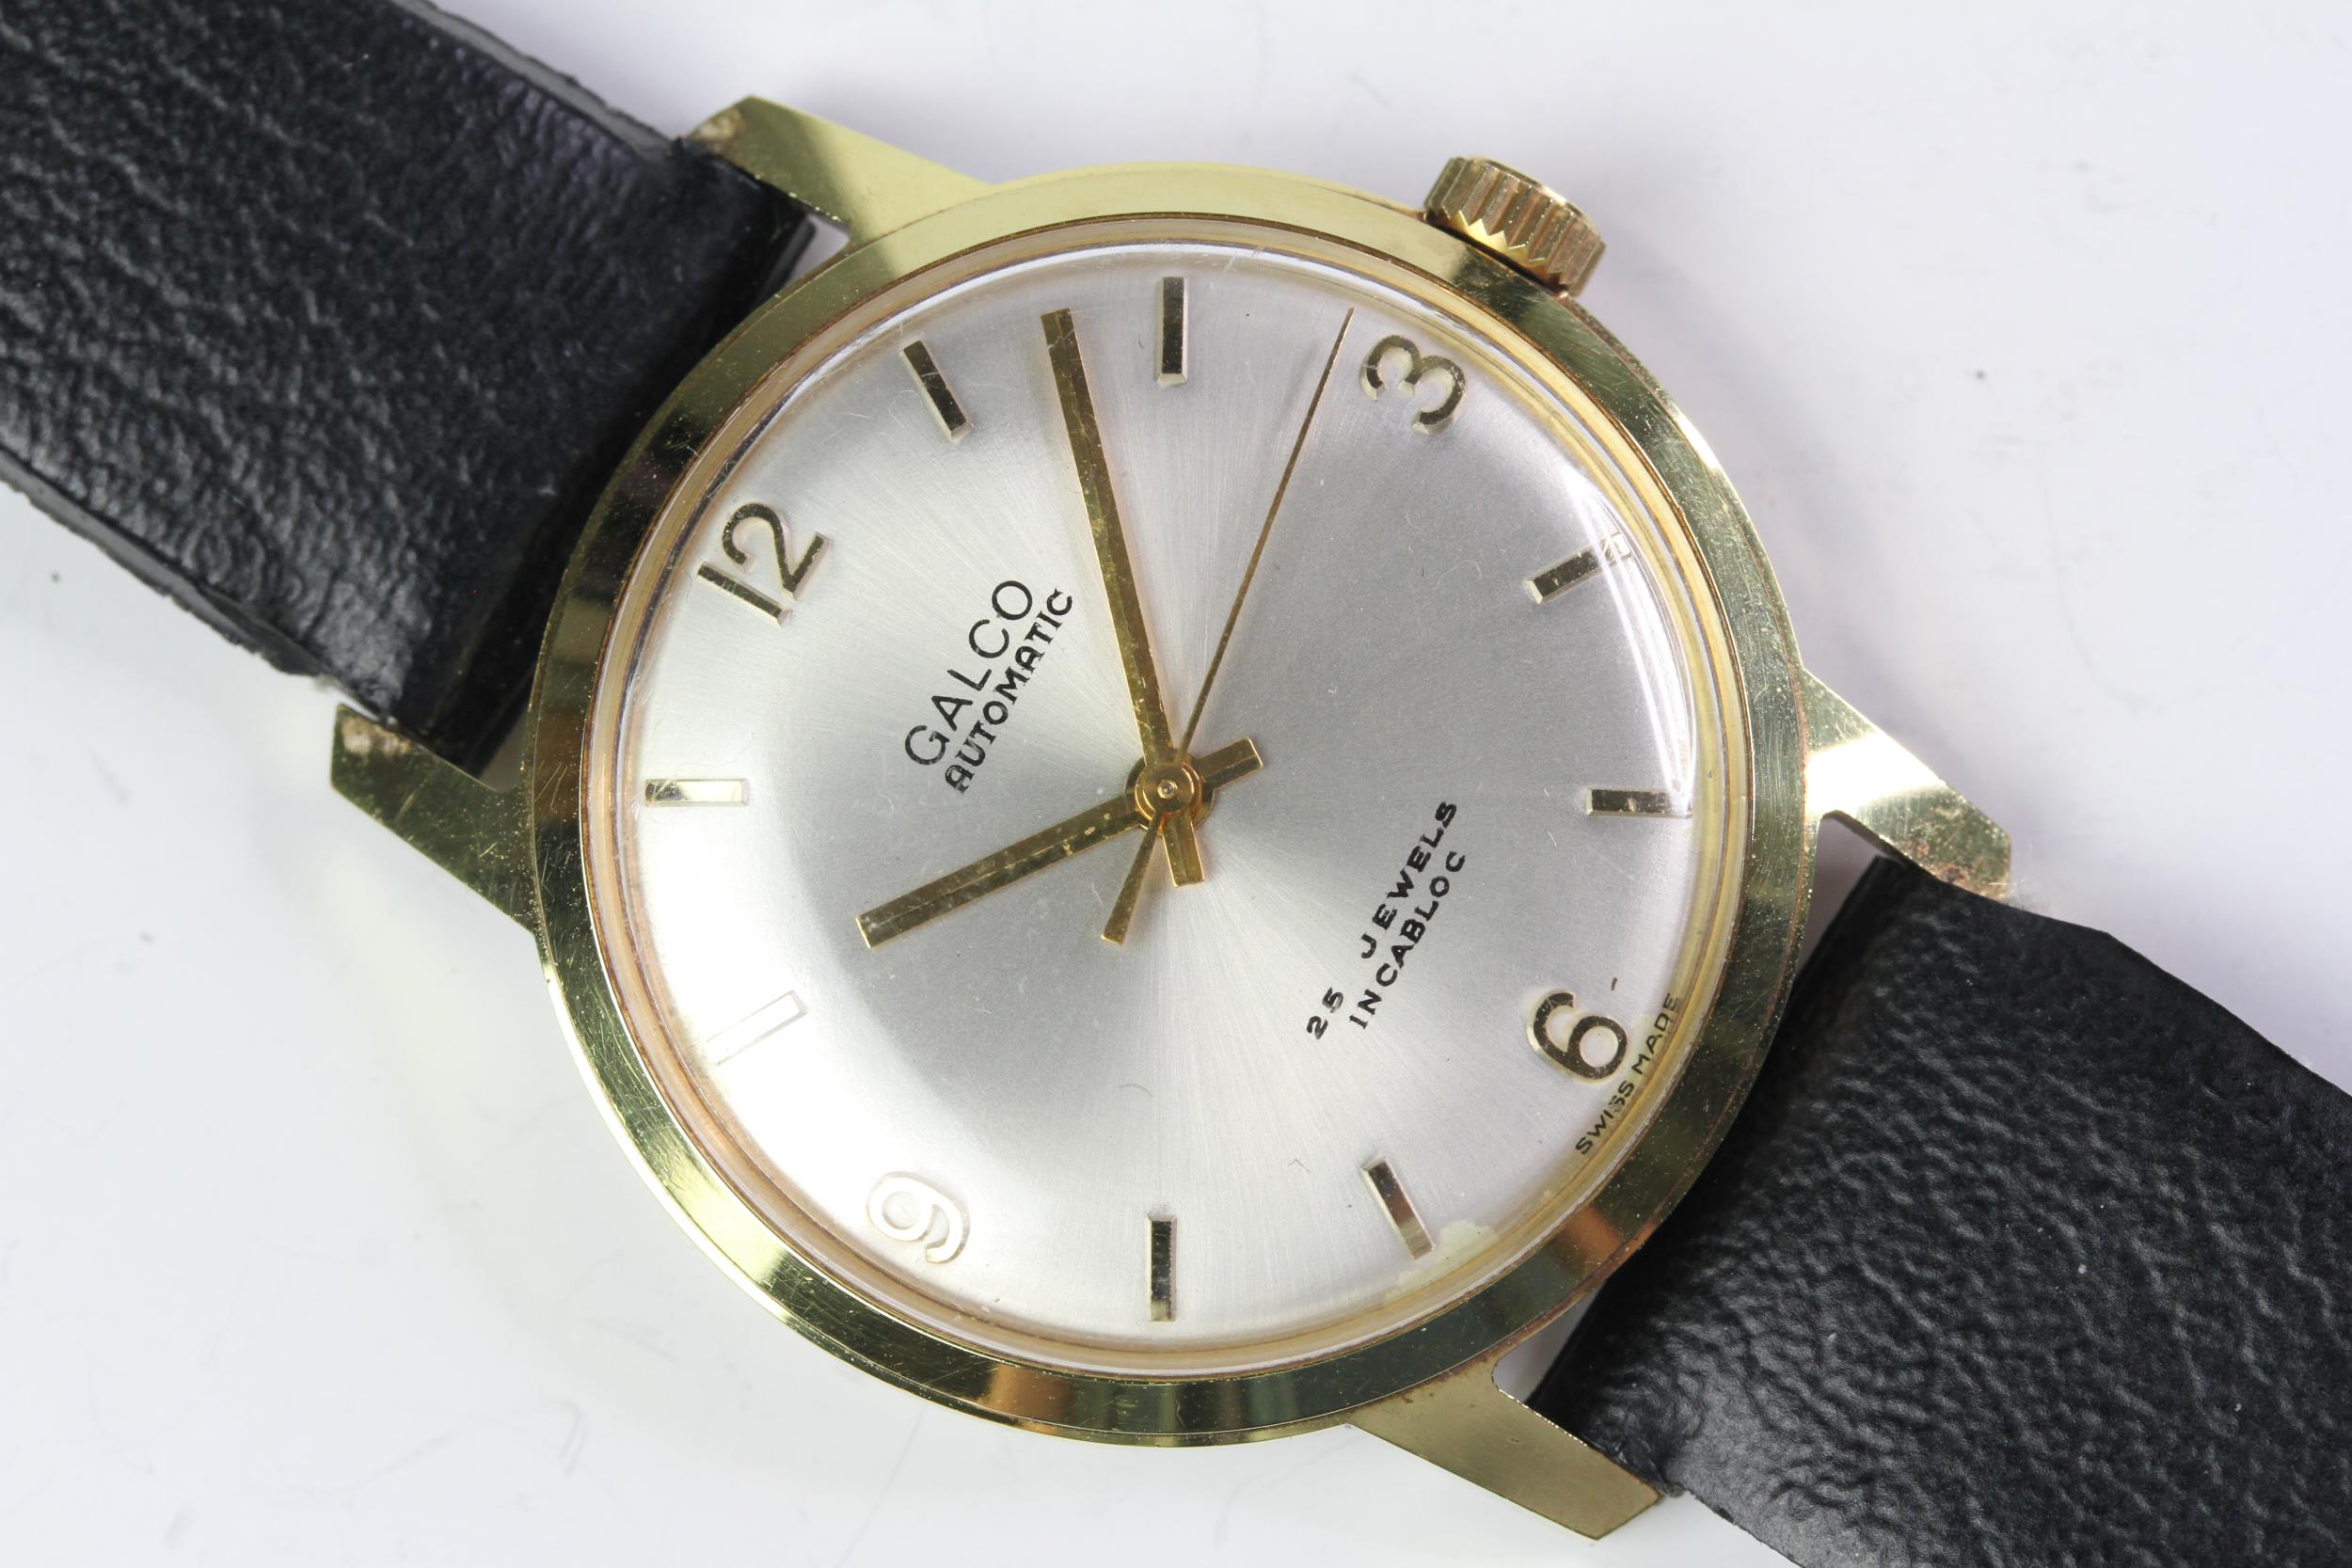 Galco ( Gallet watch Company ) Gents Automatic Watch, Gold Plated case, with Screw Down Back, silver